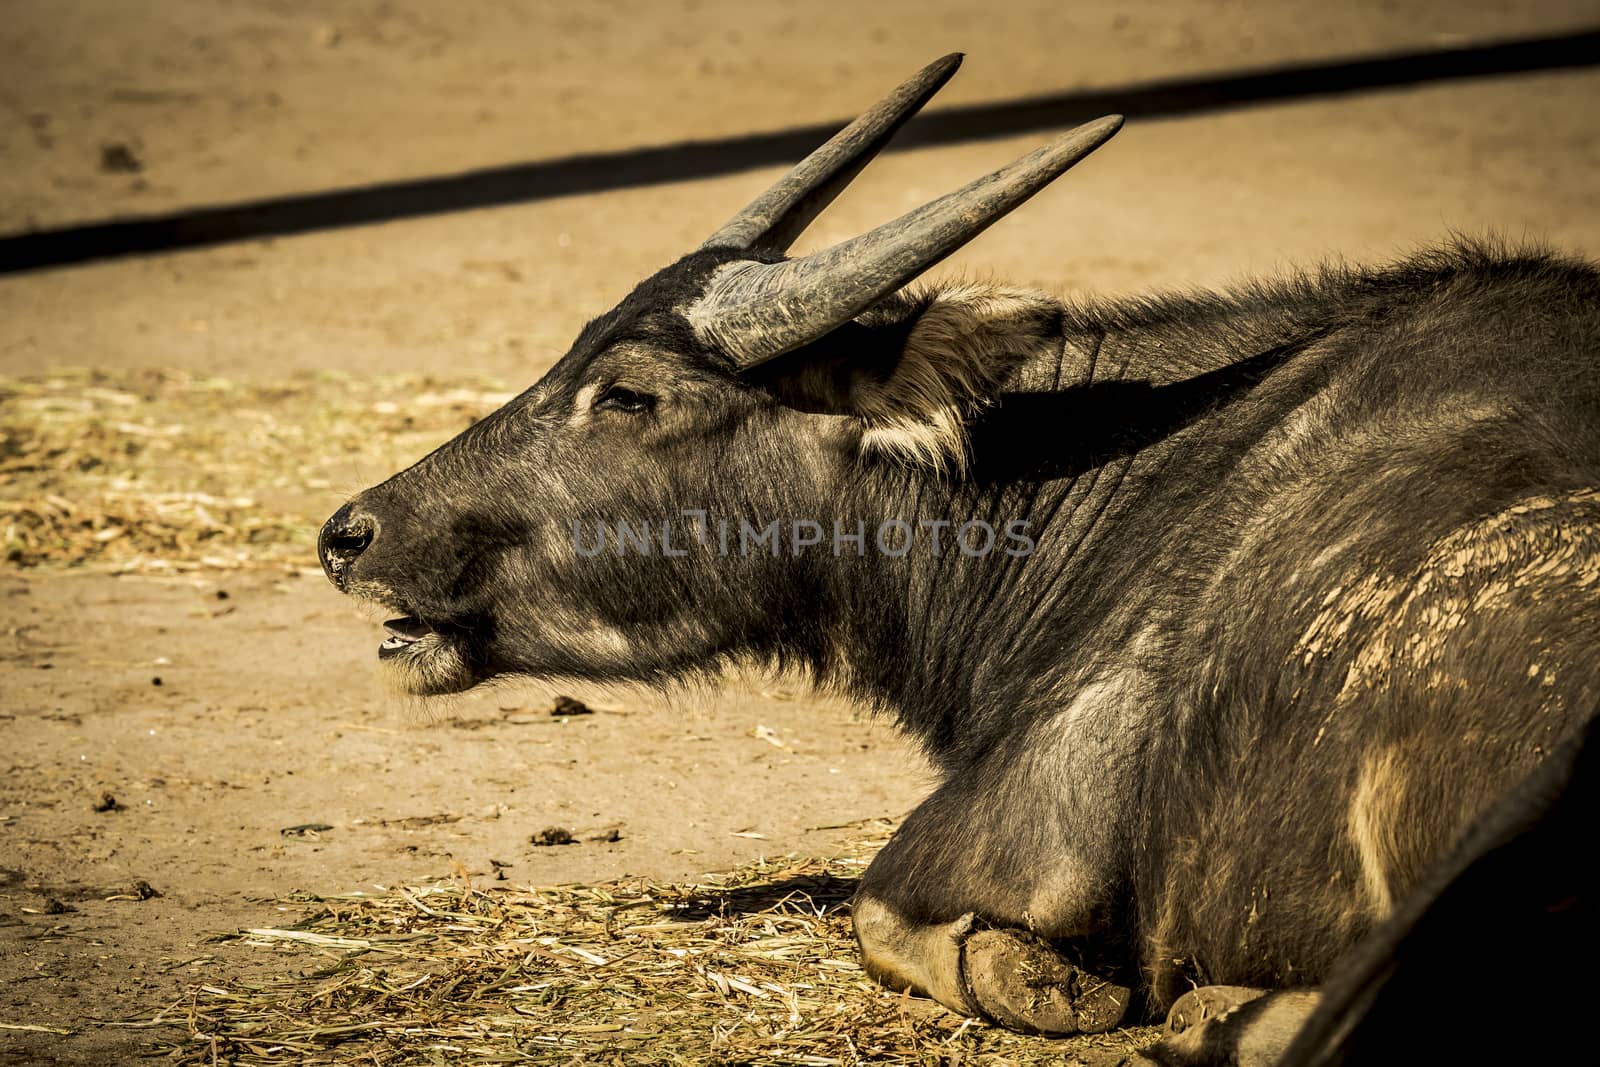 A black Water Buffalo with large horns sitting on the ground